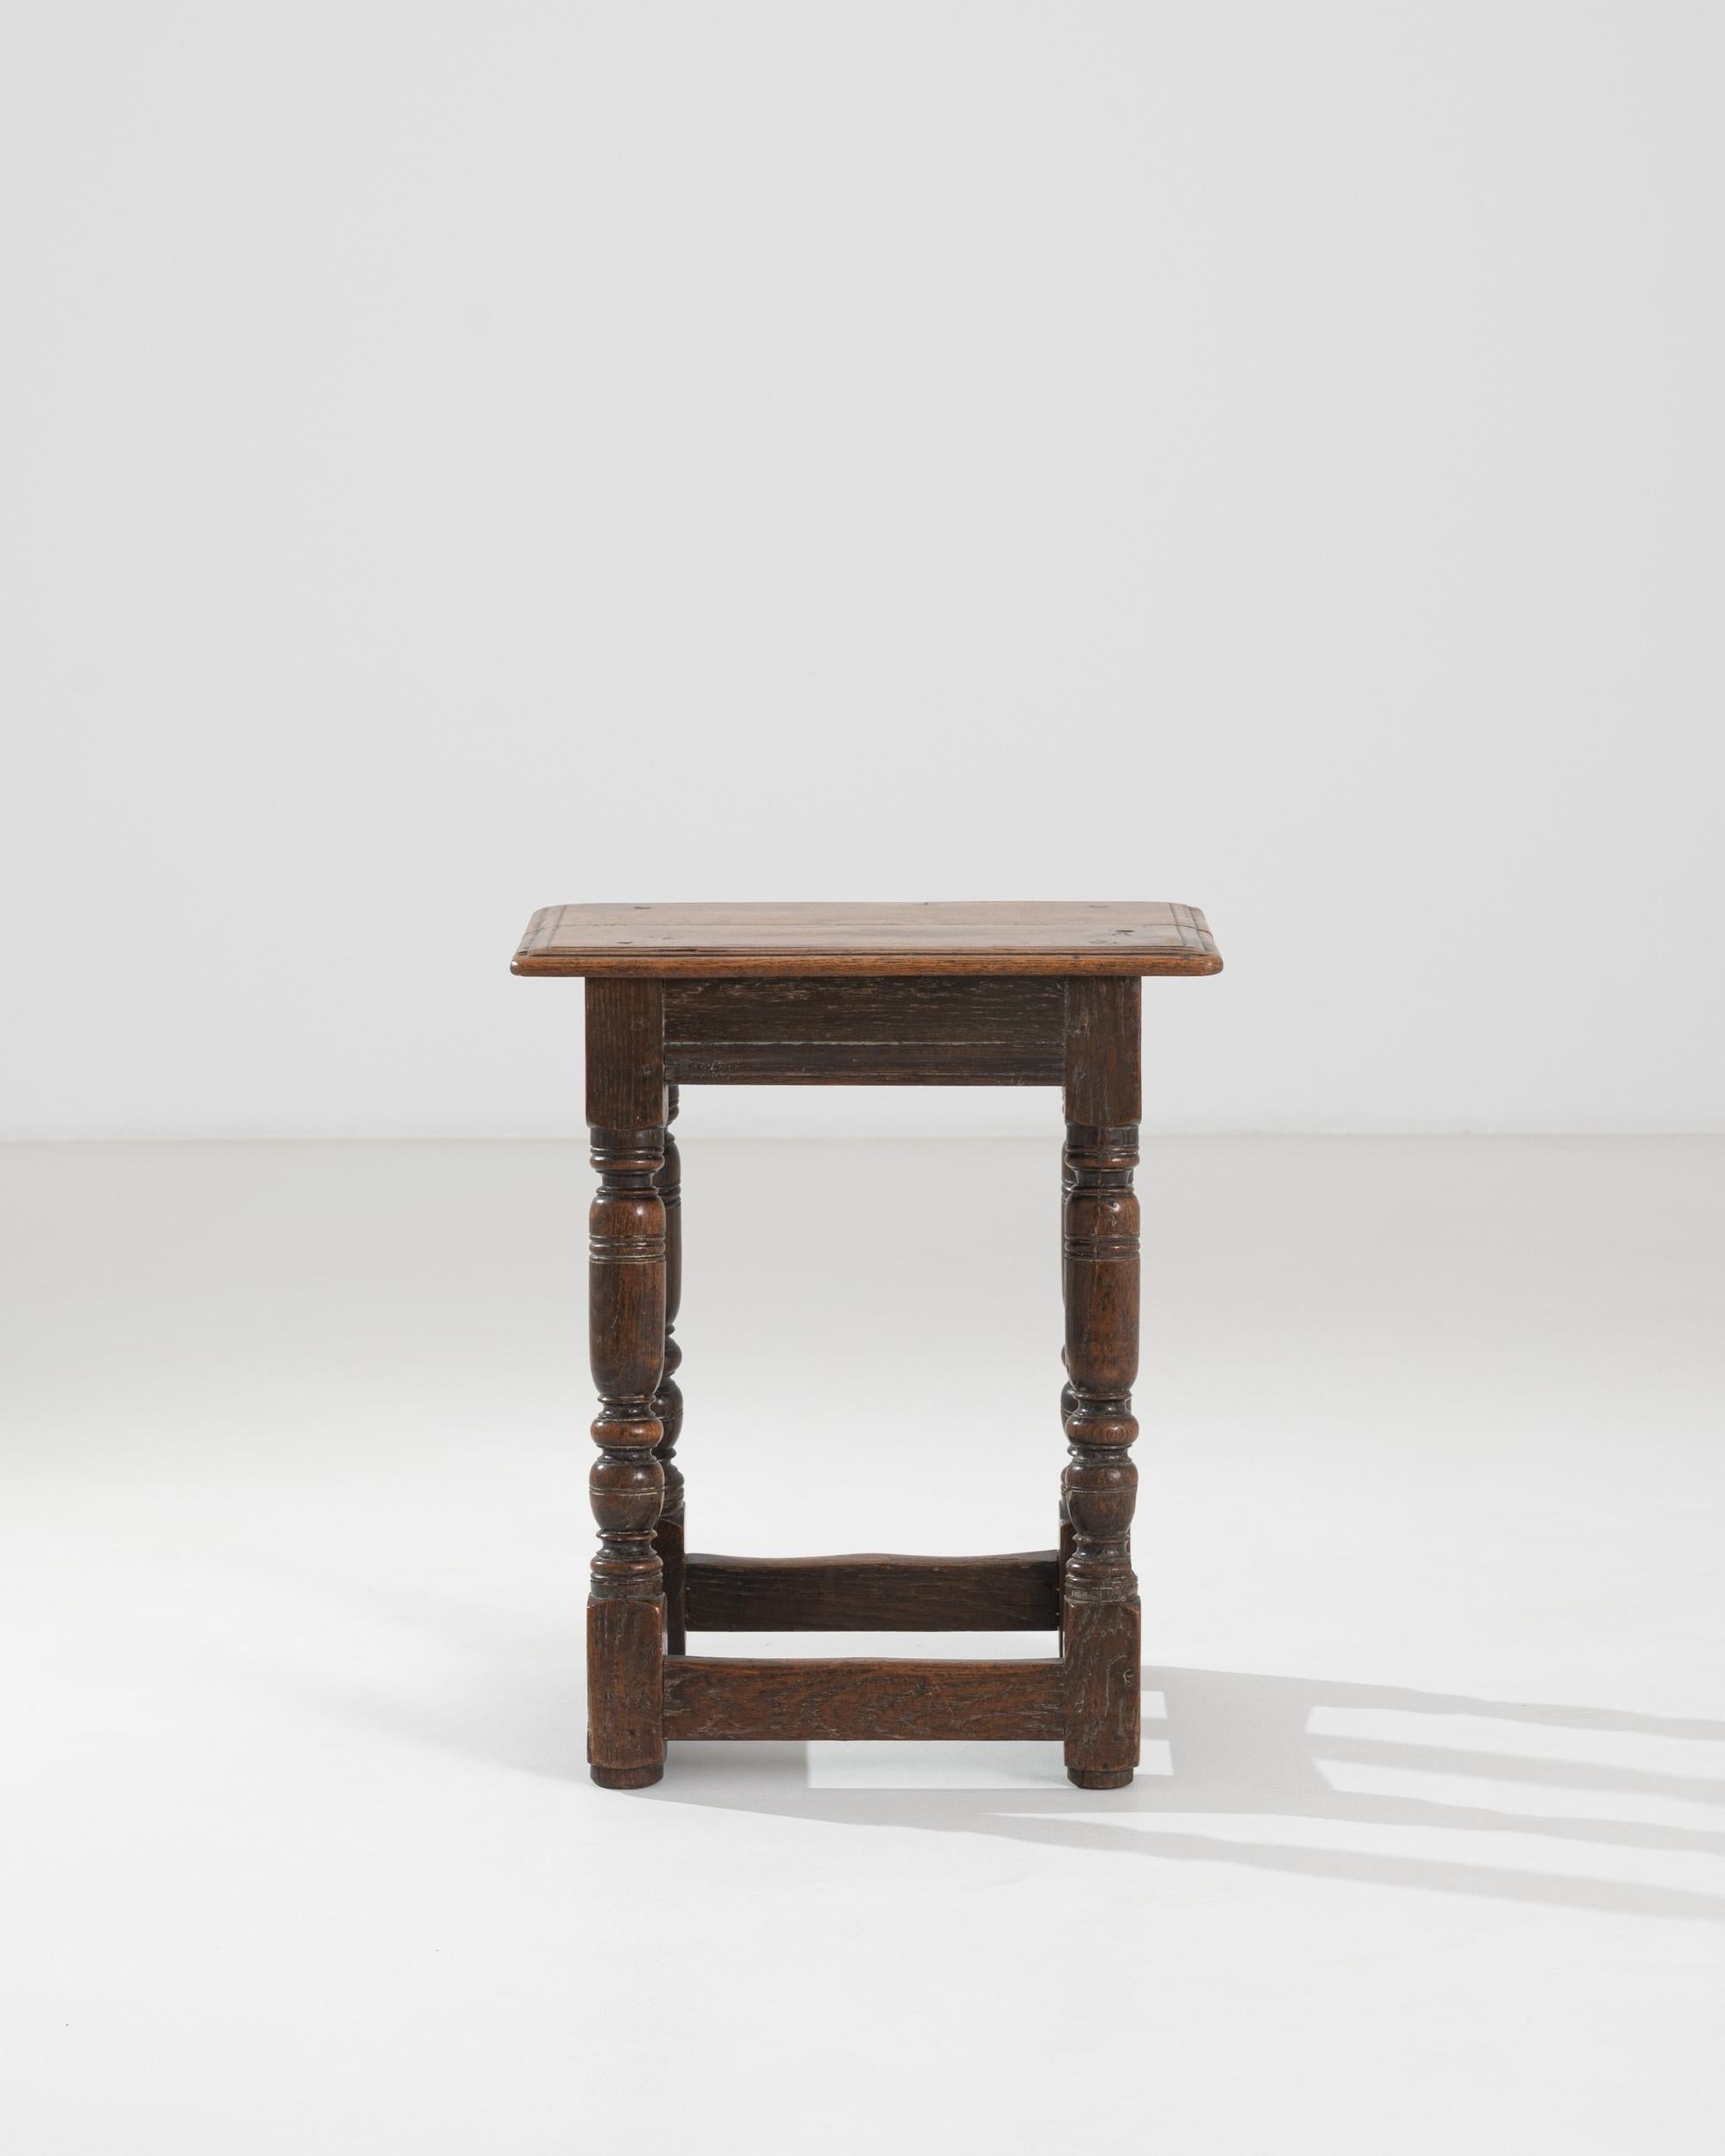 An oak stool produced in France. The piece features angled legs, joined by square stretchers and assembled with mortise and tenon joints. The wood is colored with its original finish, the natural tone of the oak, highlighting a discrete dark patina.